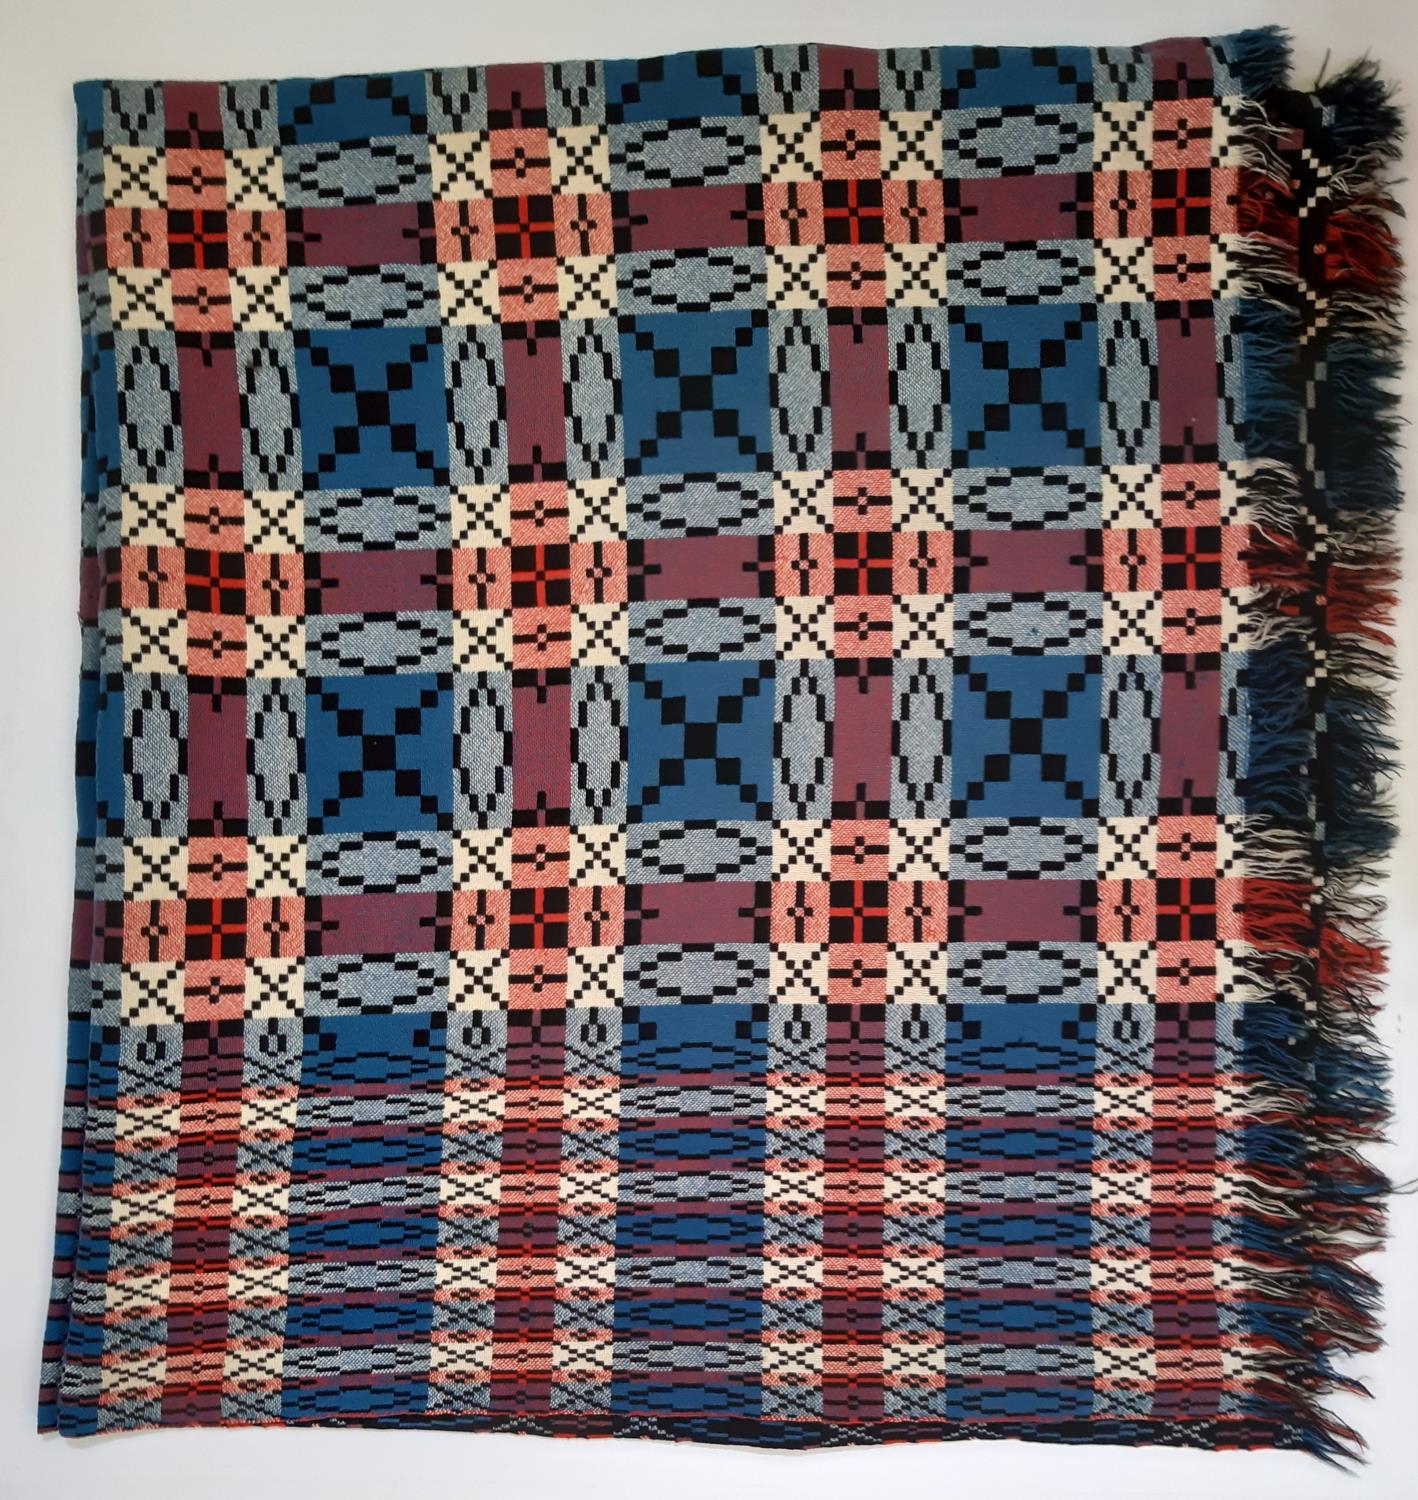 Traditional Welsh woollen blanket in reversible weave in red, blue, black and white, 240x220cm - Image 3 of 3